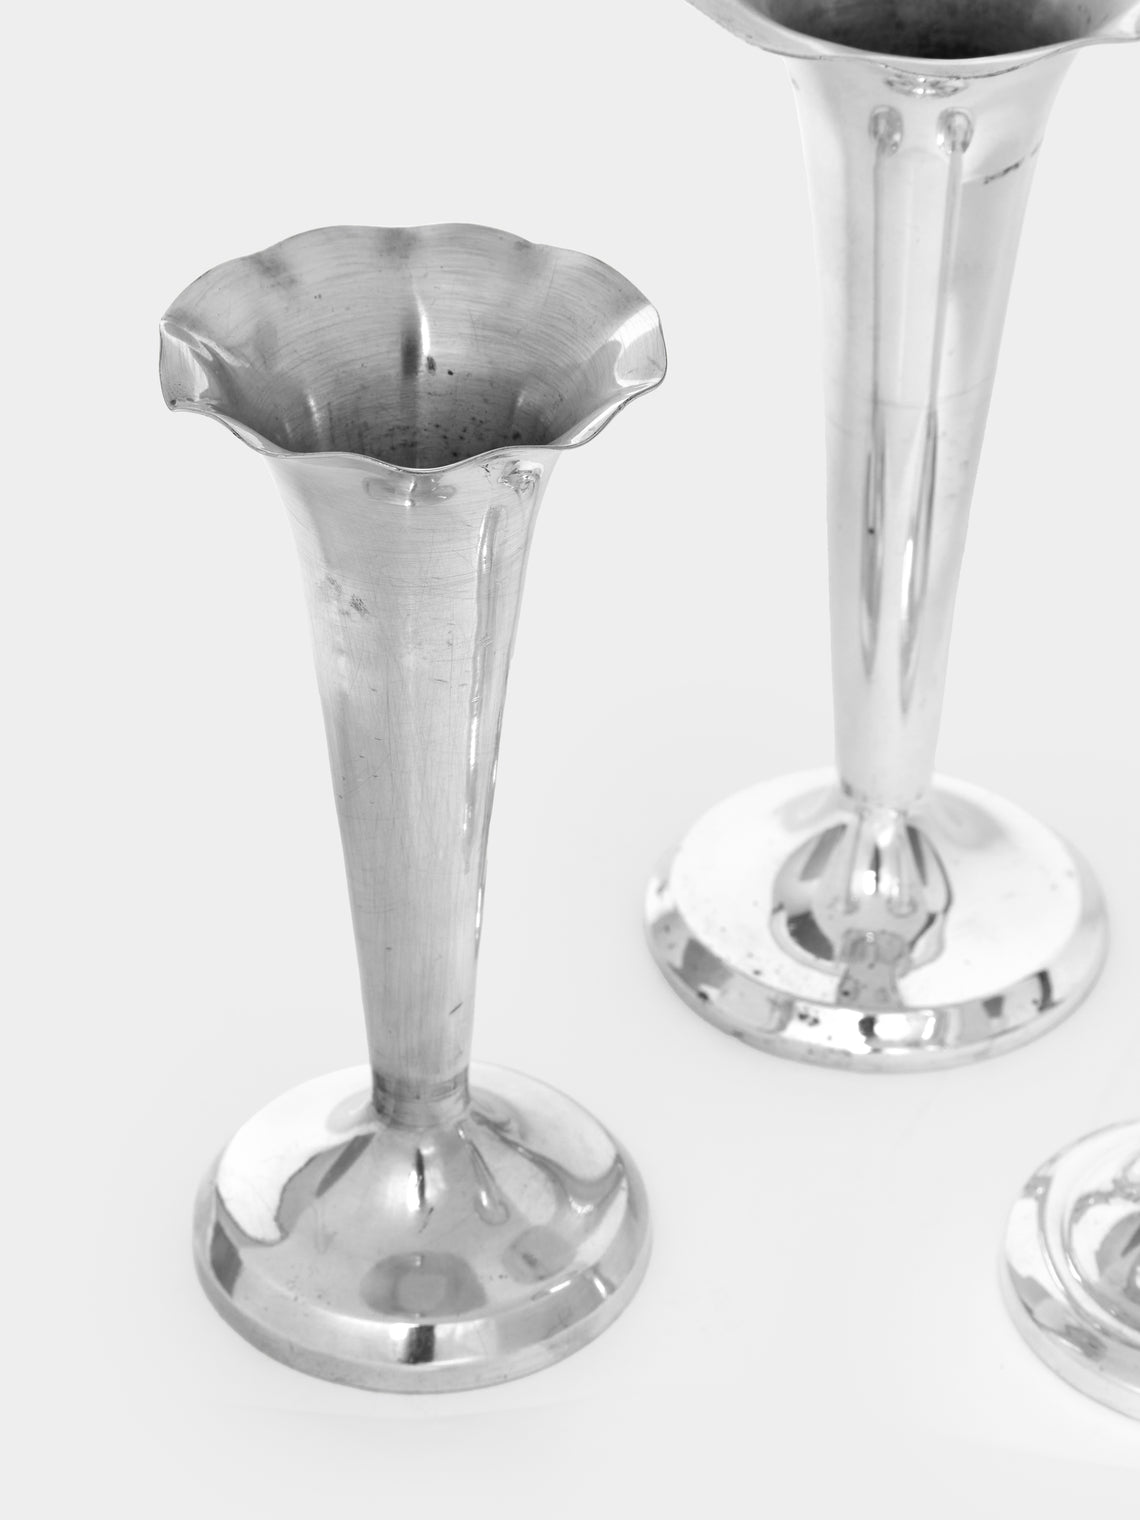 Antique and Vintage - 1950s Gio Ponti Silver-Plated Bud Vases (Set of 3) -  - ABASK